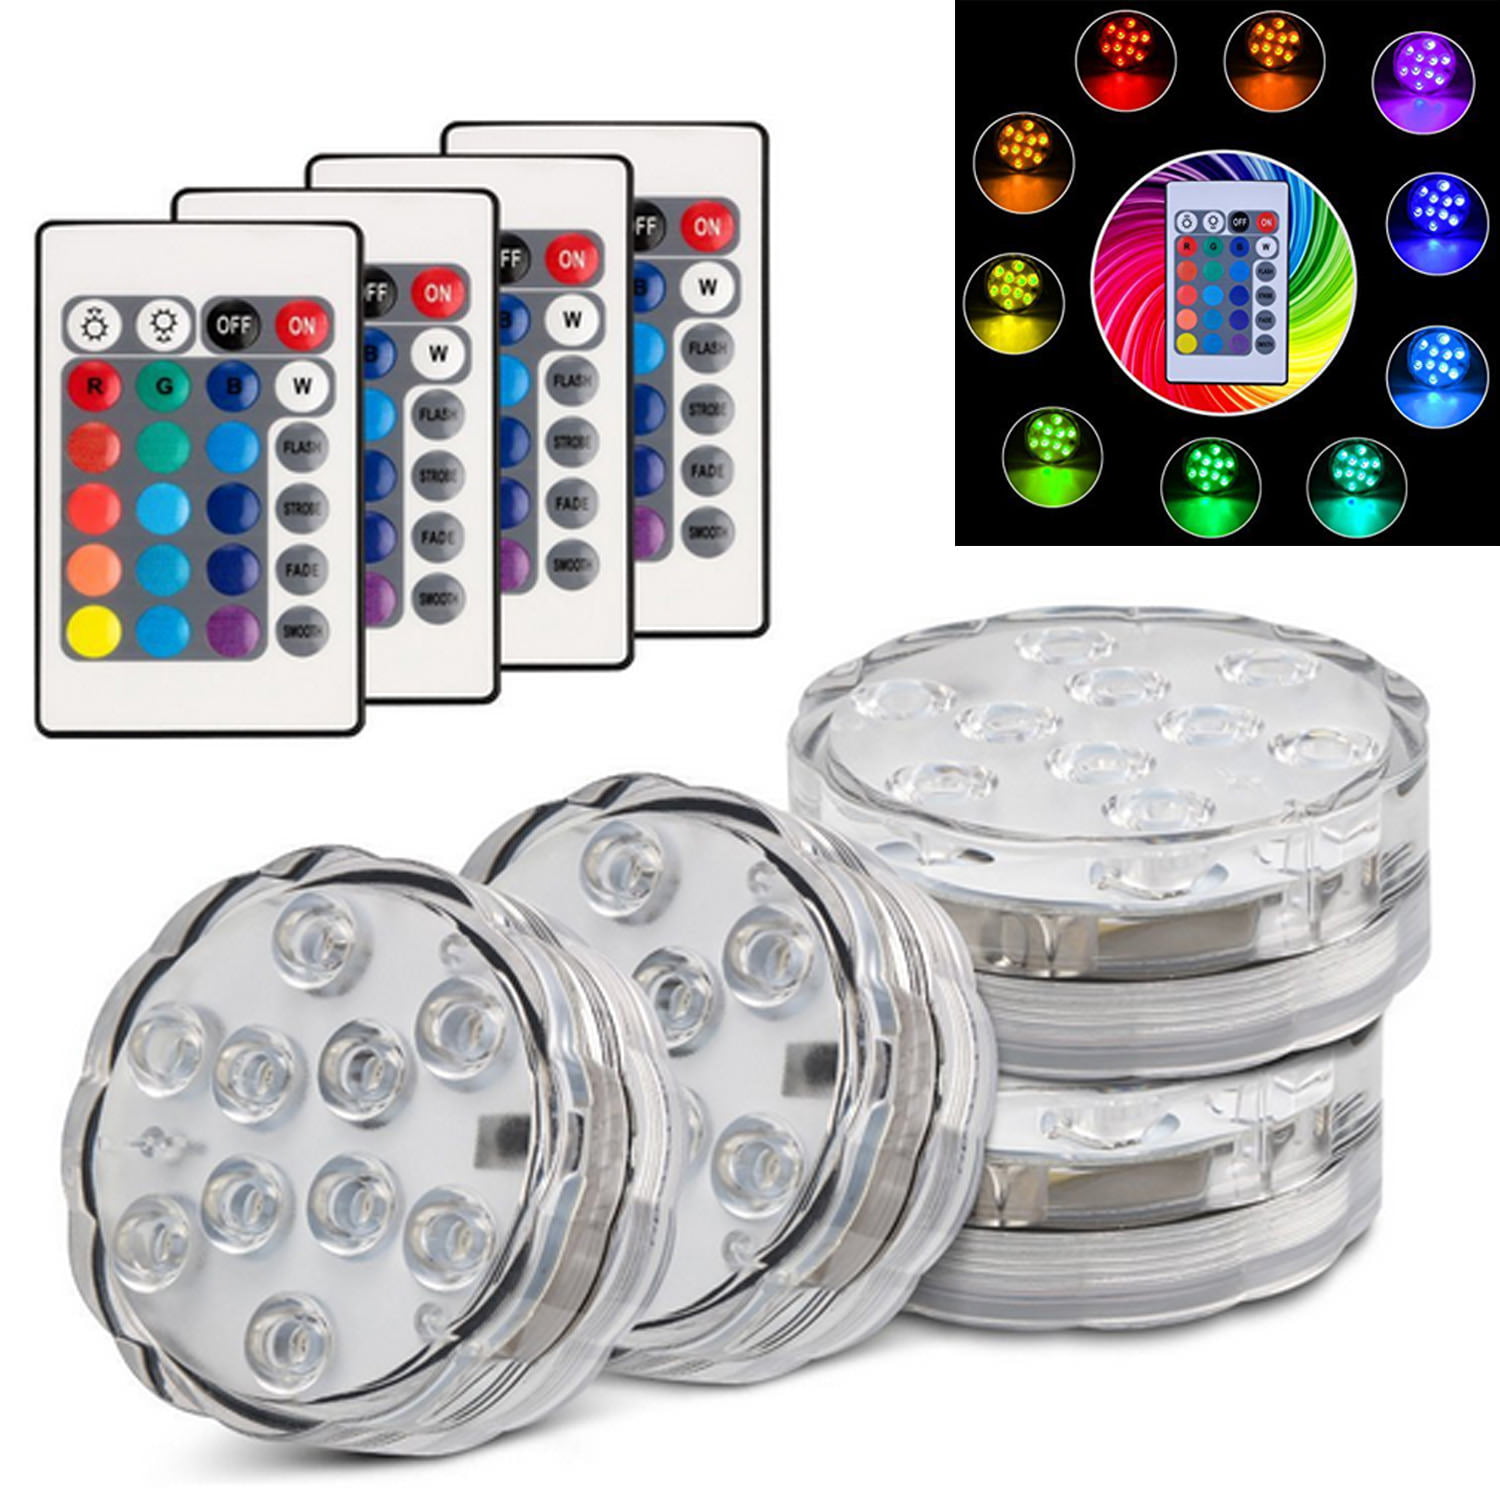 4Packs Multi Color Submersible Led Lights Remote Controlled Underwater Lights 